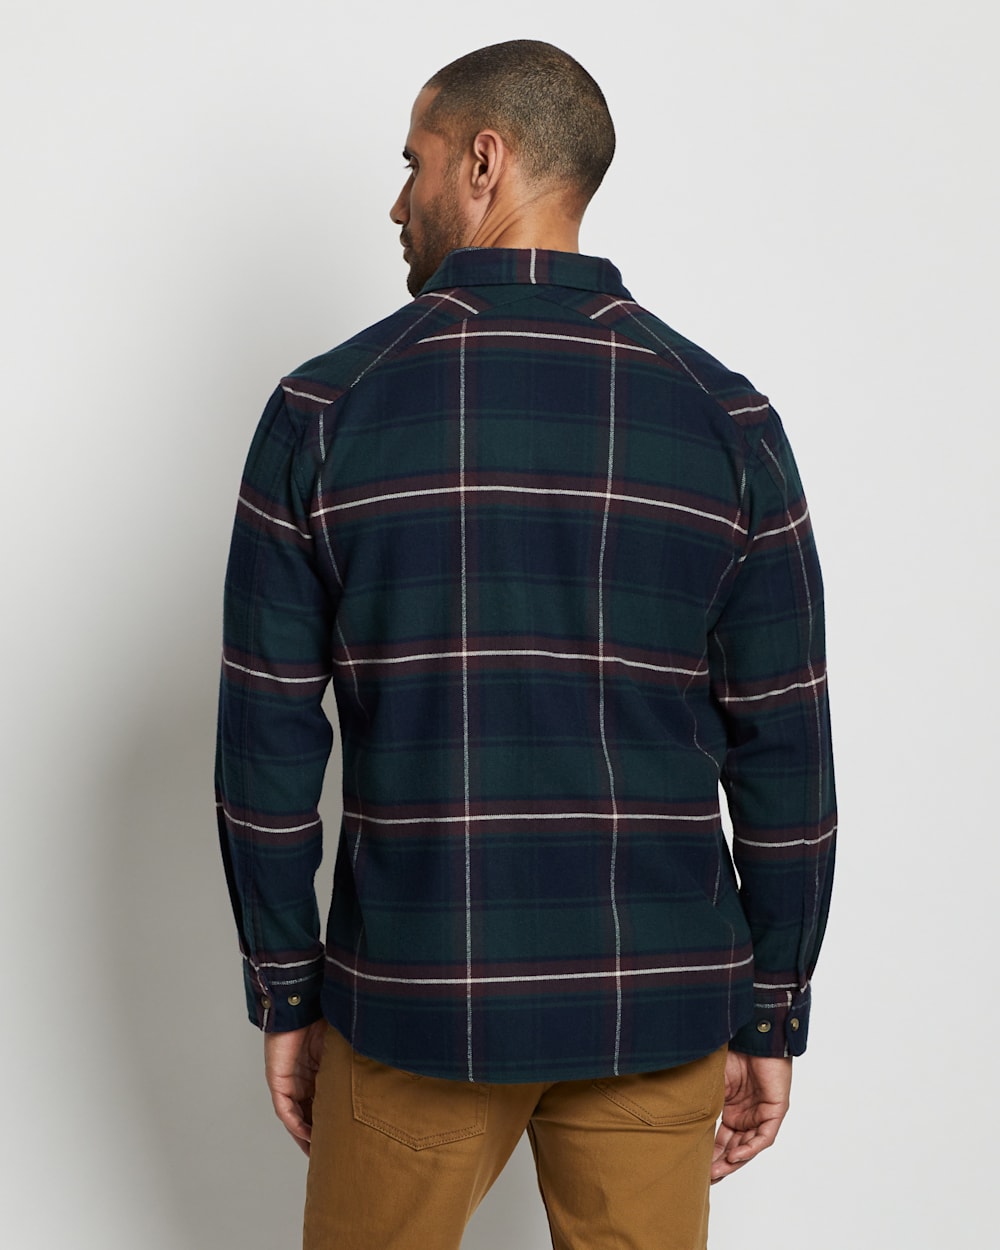 ALTERNATE VIEW OF MEN'S FREMONT DOUBLE-BRUSHED FLANNEL SHIRT IN GREEN/NAVY PLAID image number 3